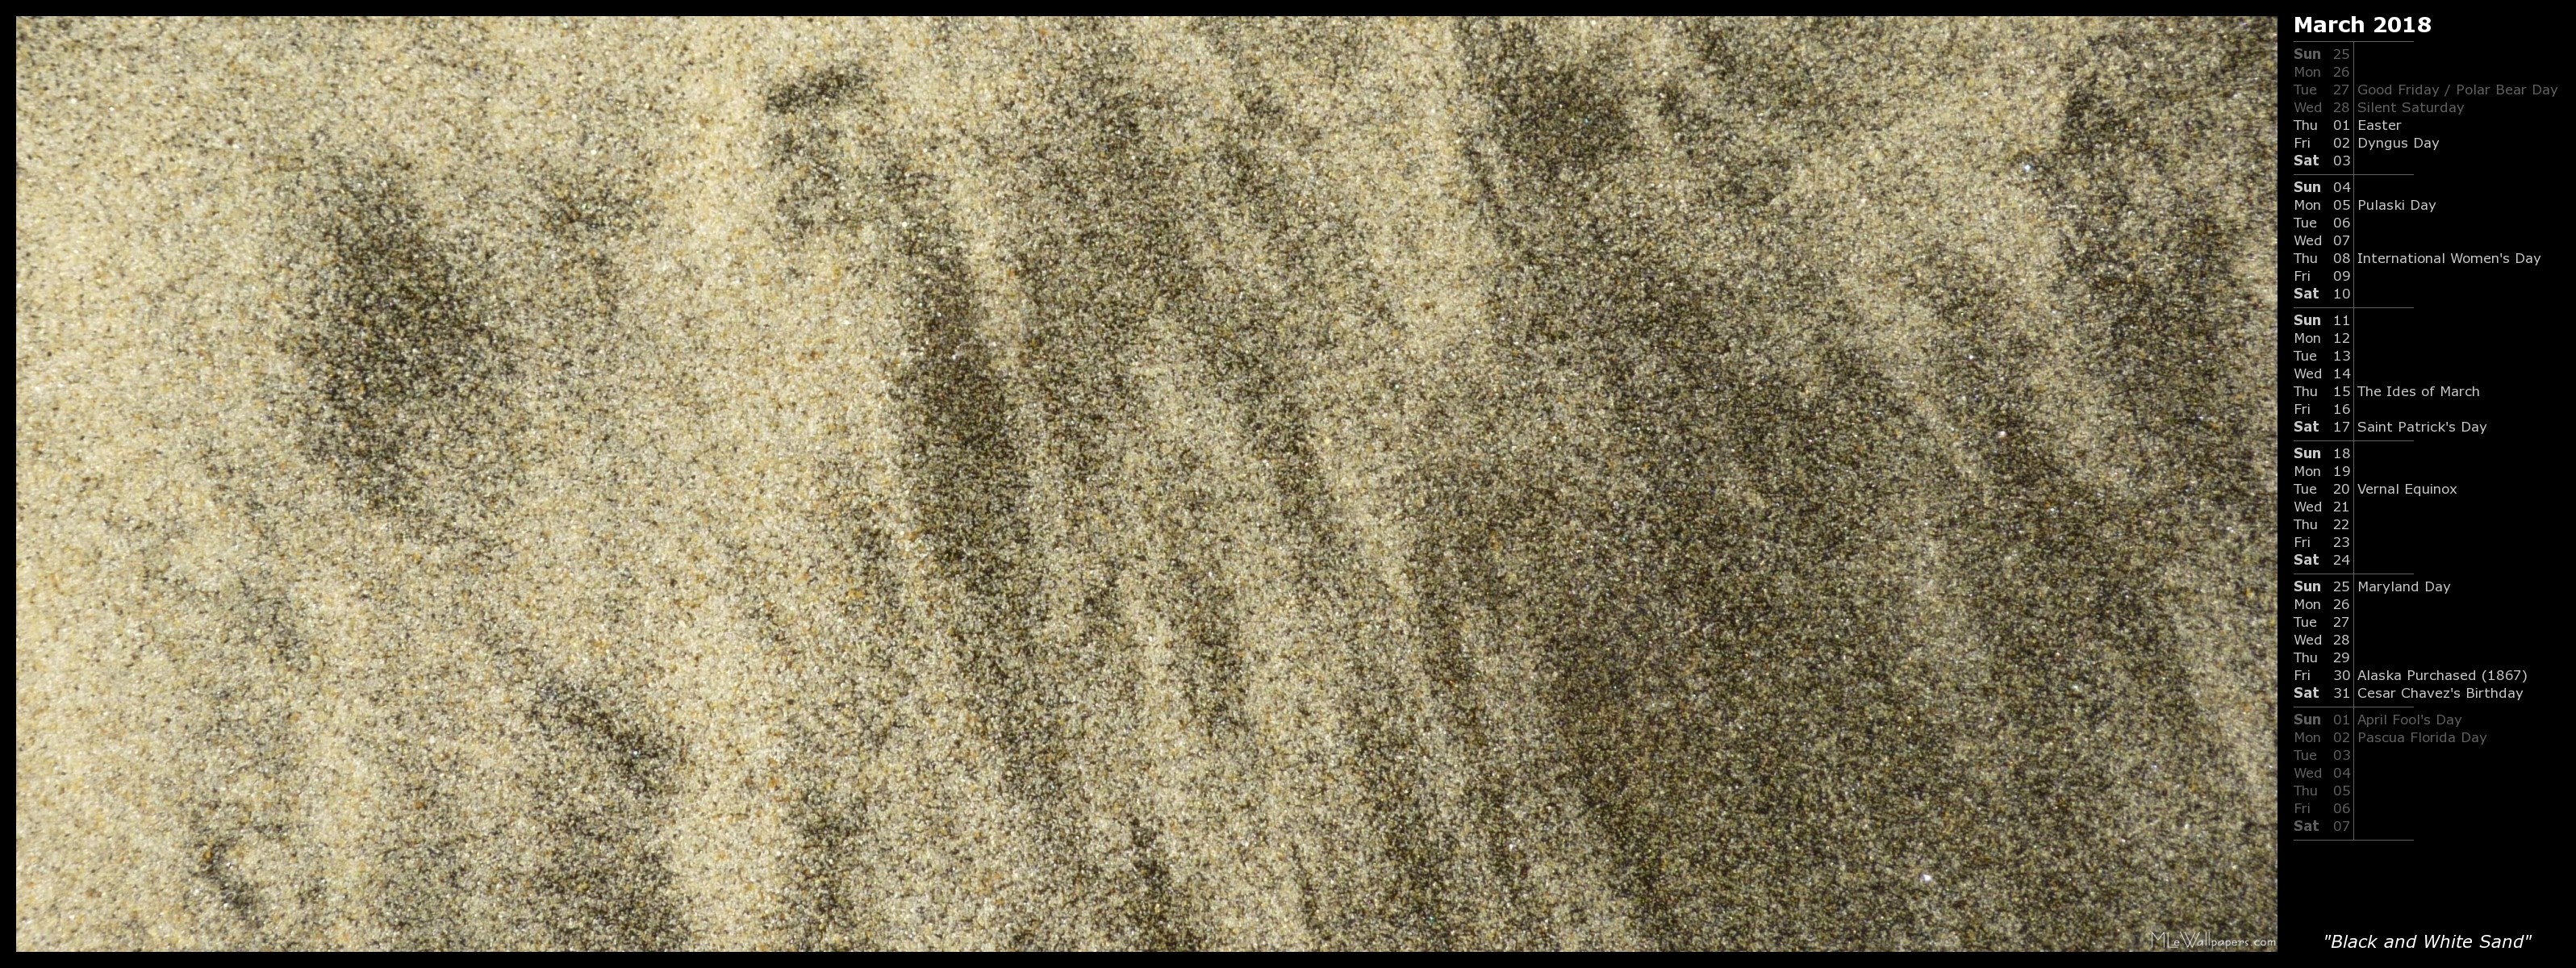 3193x1200 Black sand beaches are beautiful, and so are white sand beaches. A mix of  the two colors makes this abstract nature wallpaper interesting.